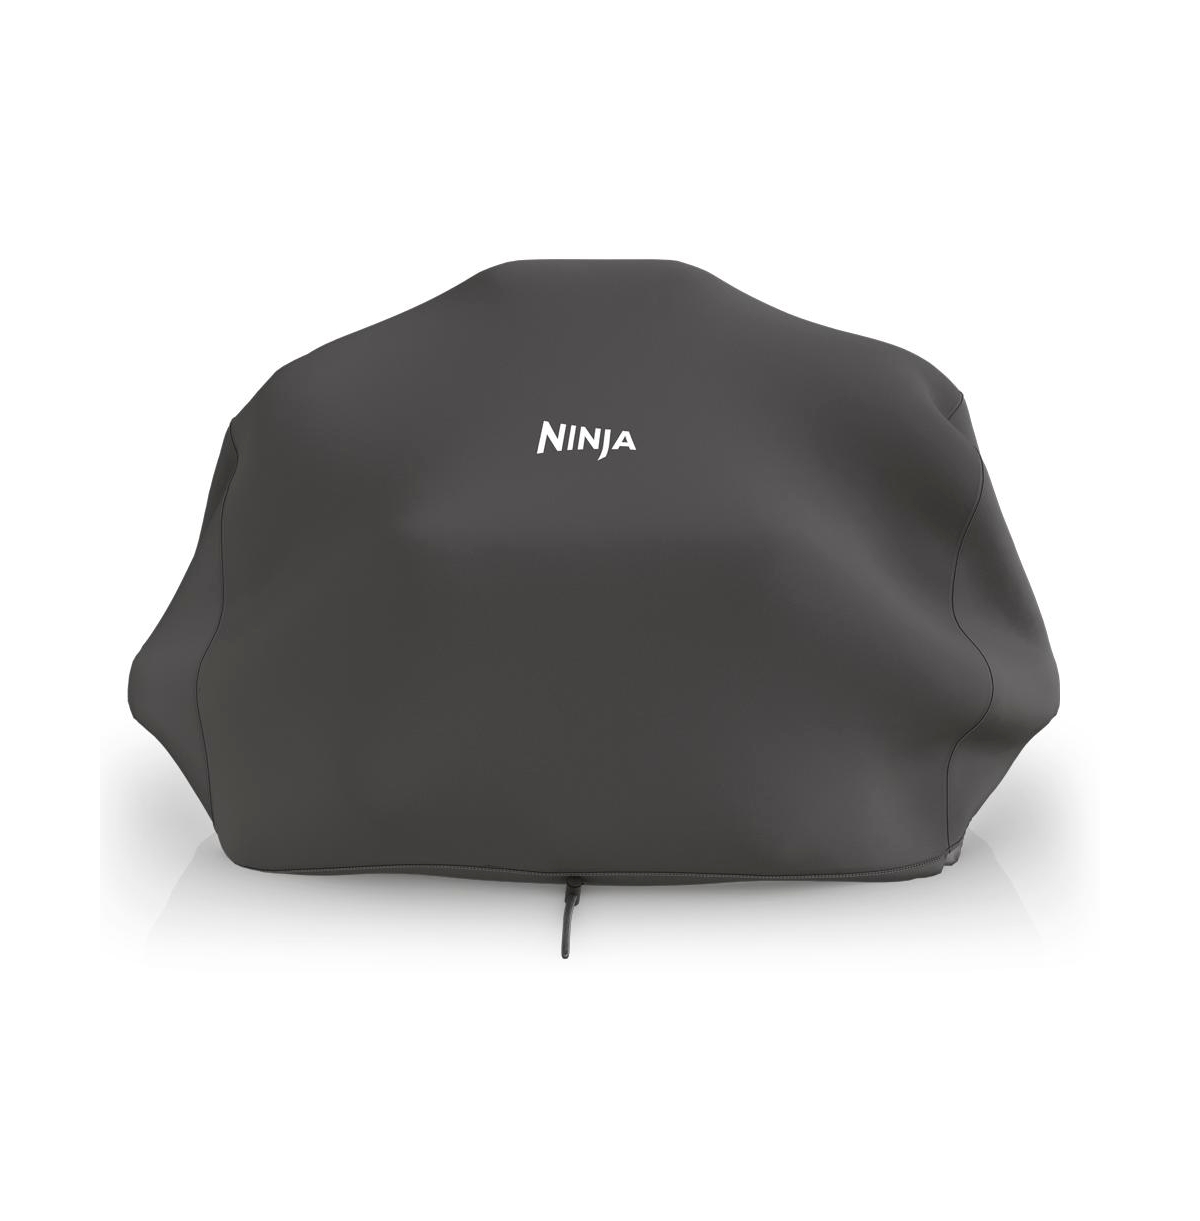 Wood Fire Premium Grill Outdoor Grill Cover, Made for Ninja Wood Fire Grills, Xskcover - Black